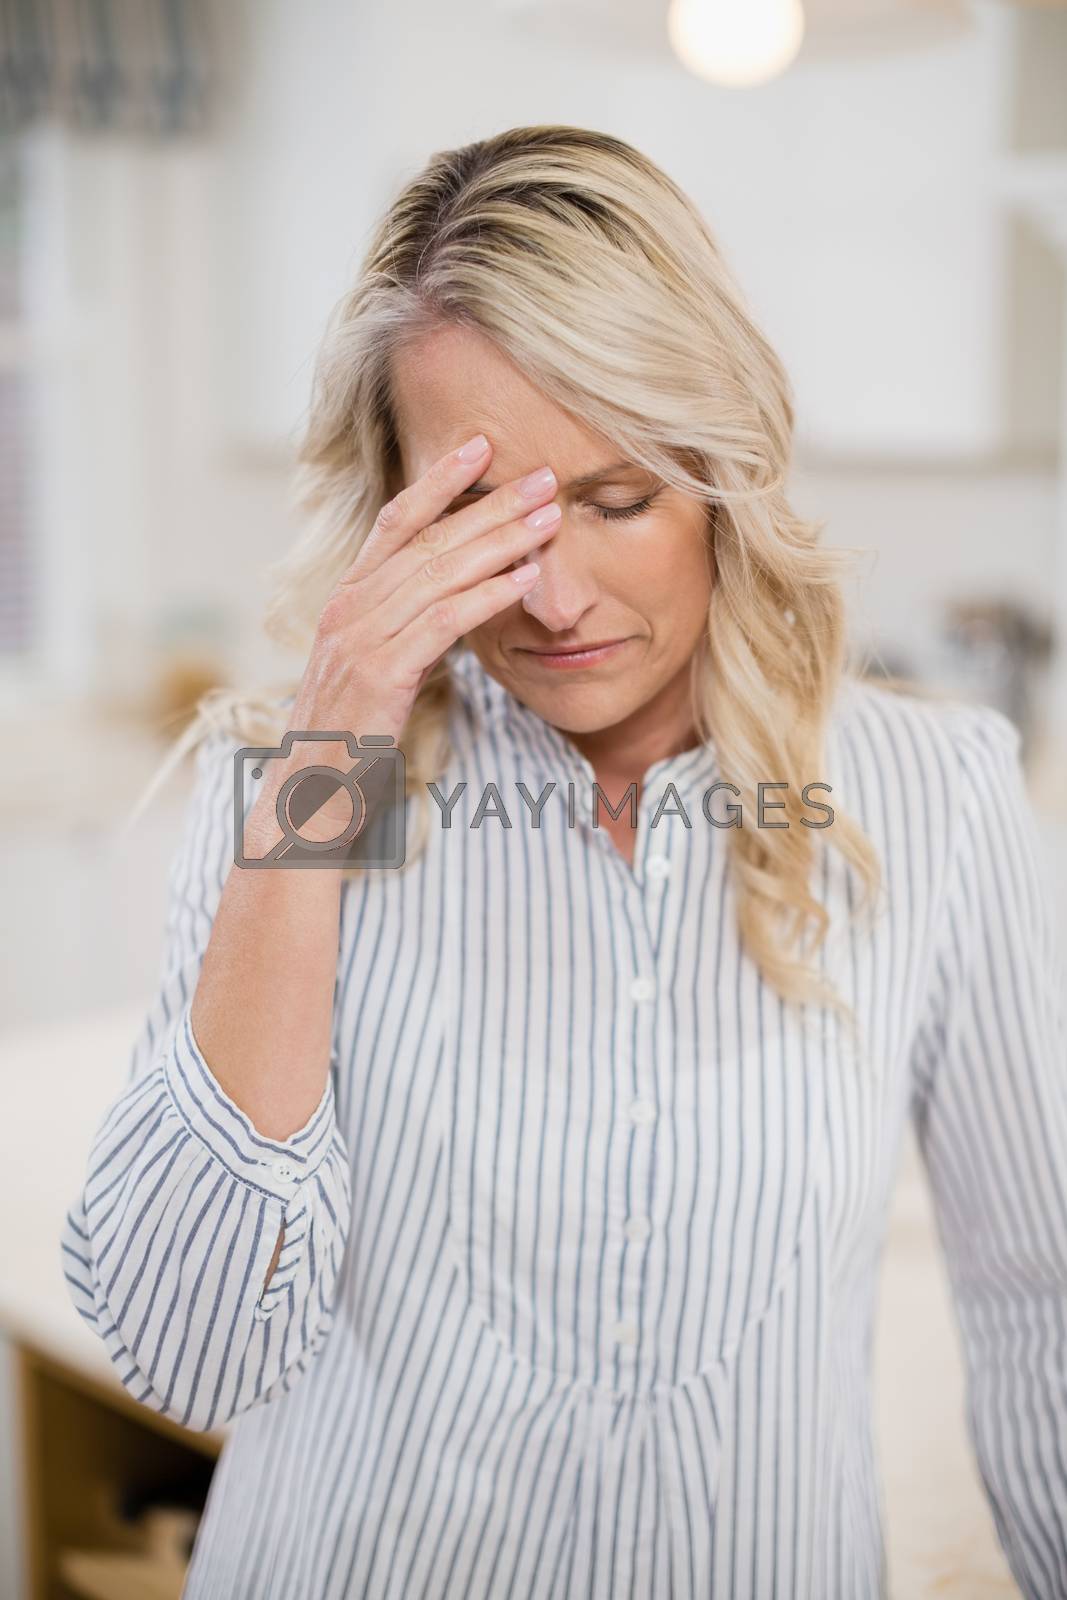 Royalty free image of Tense woman with hand on forehead by Wavebreakmedia